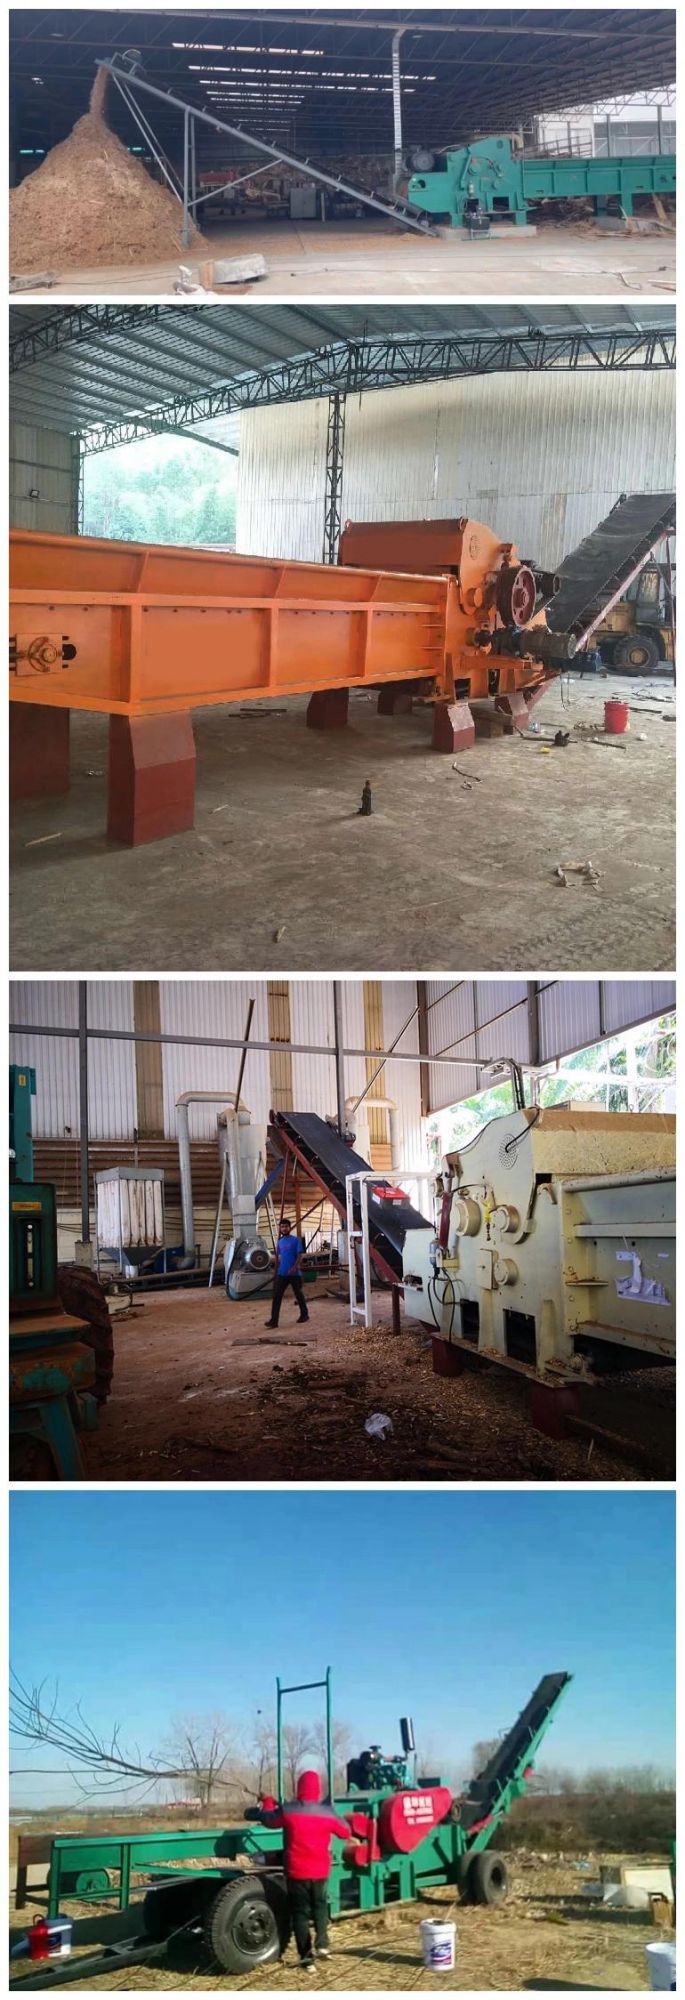 Shd Wood Chipper Simple Operation of Wood Chipping Machine